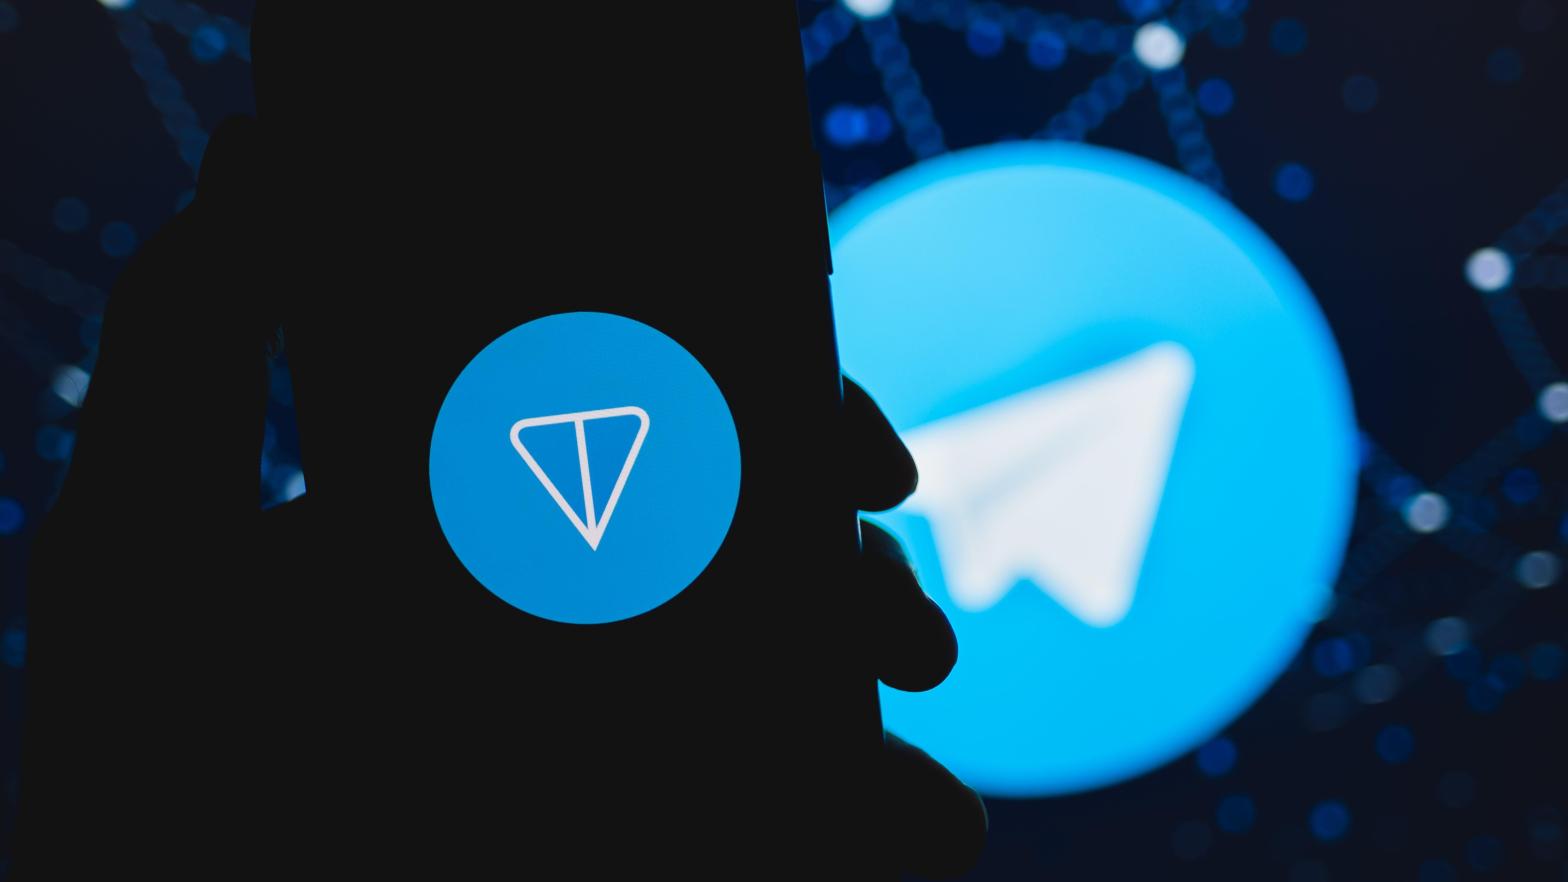 Telegram has been rather hands off on its old TON Blockchain it developed years ago, but now the company wants to let users sell their own name for profit. (Photo: nikkimeel, Shutterstock)